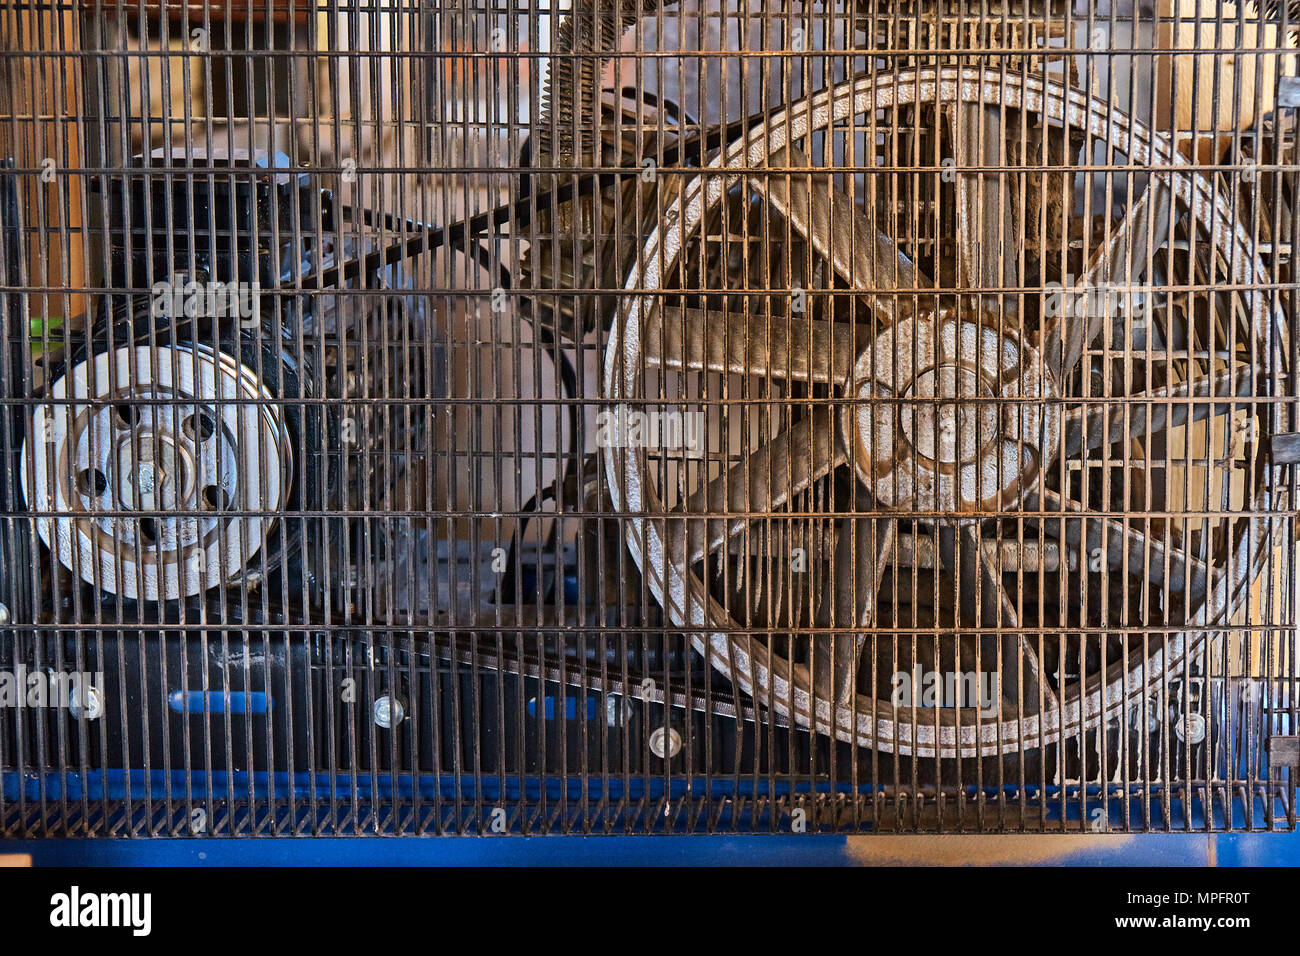 Electrical air compressor with a large fan in front panel behind a metal protective mesh Stock Photo